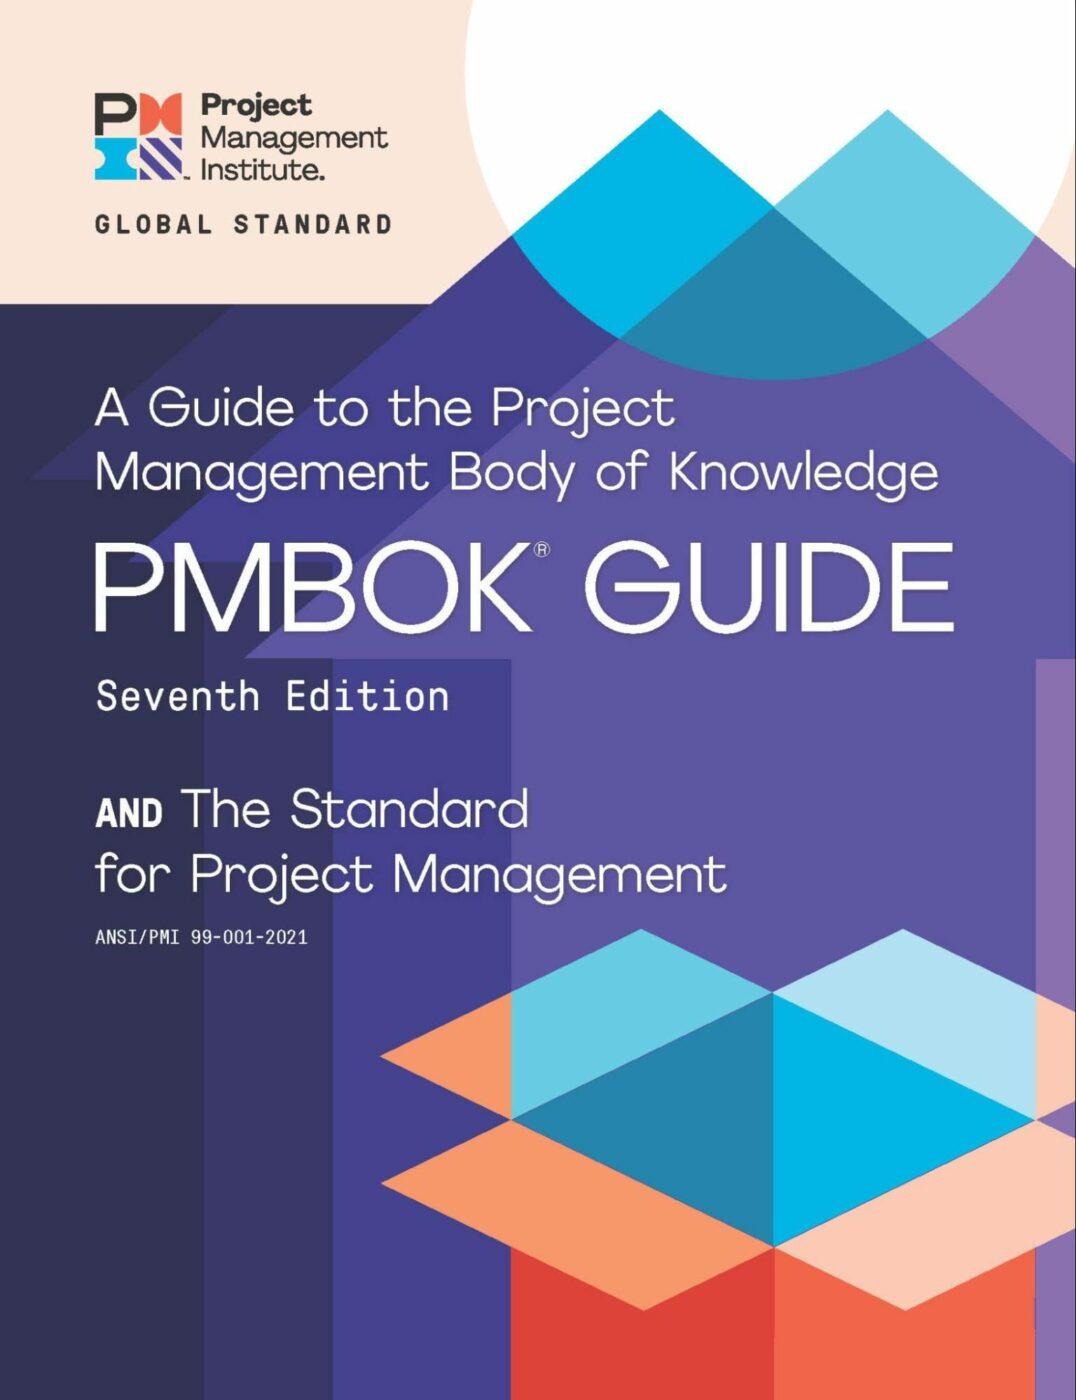 Project Management Institute PMBOK guide